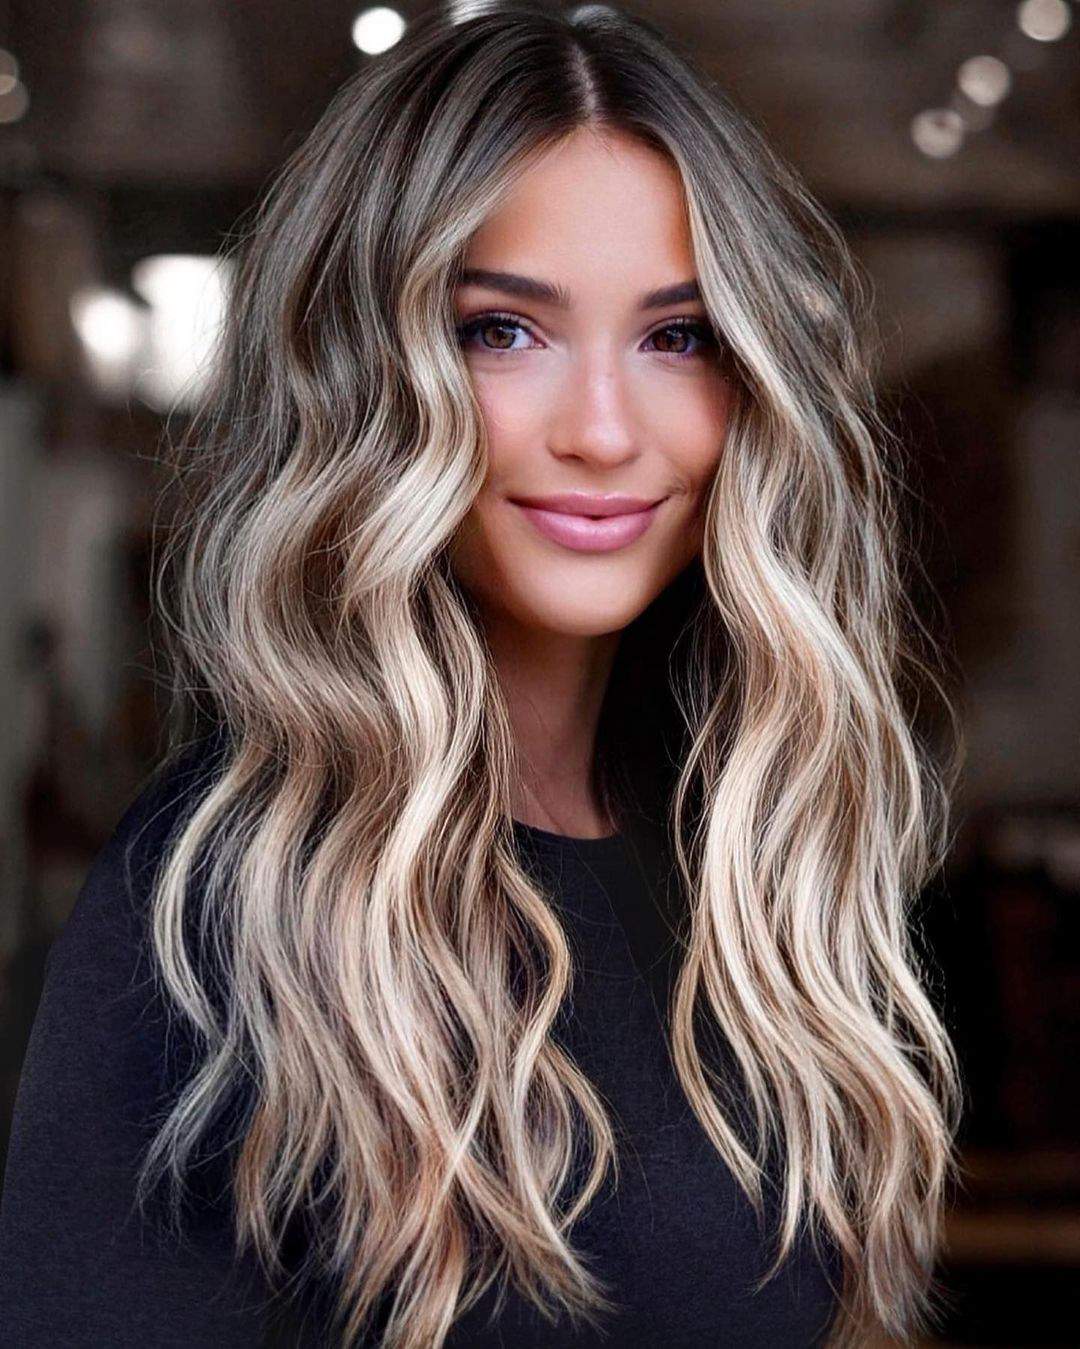 100+ Trendy Hairstyle Ideas For Women To Try In 2021 images 60